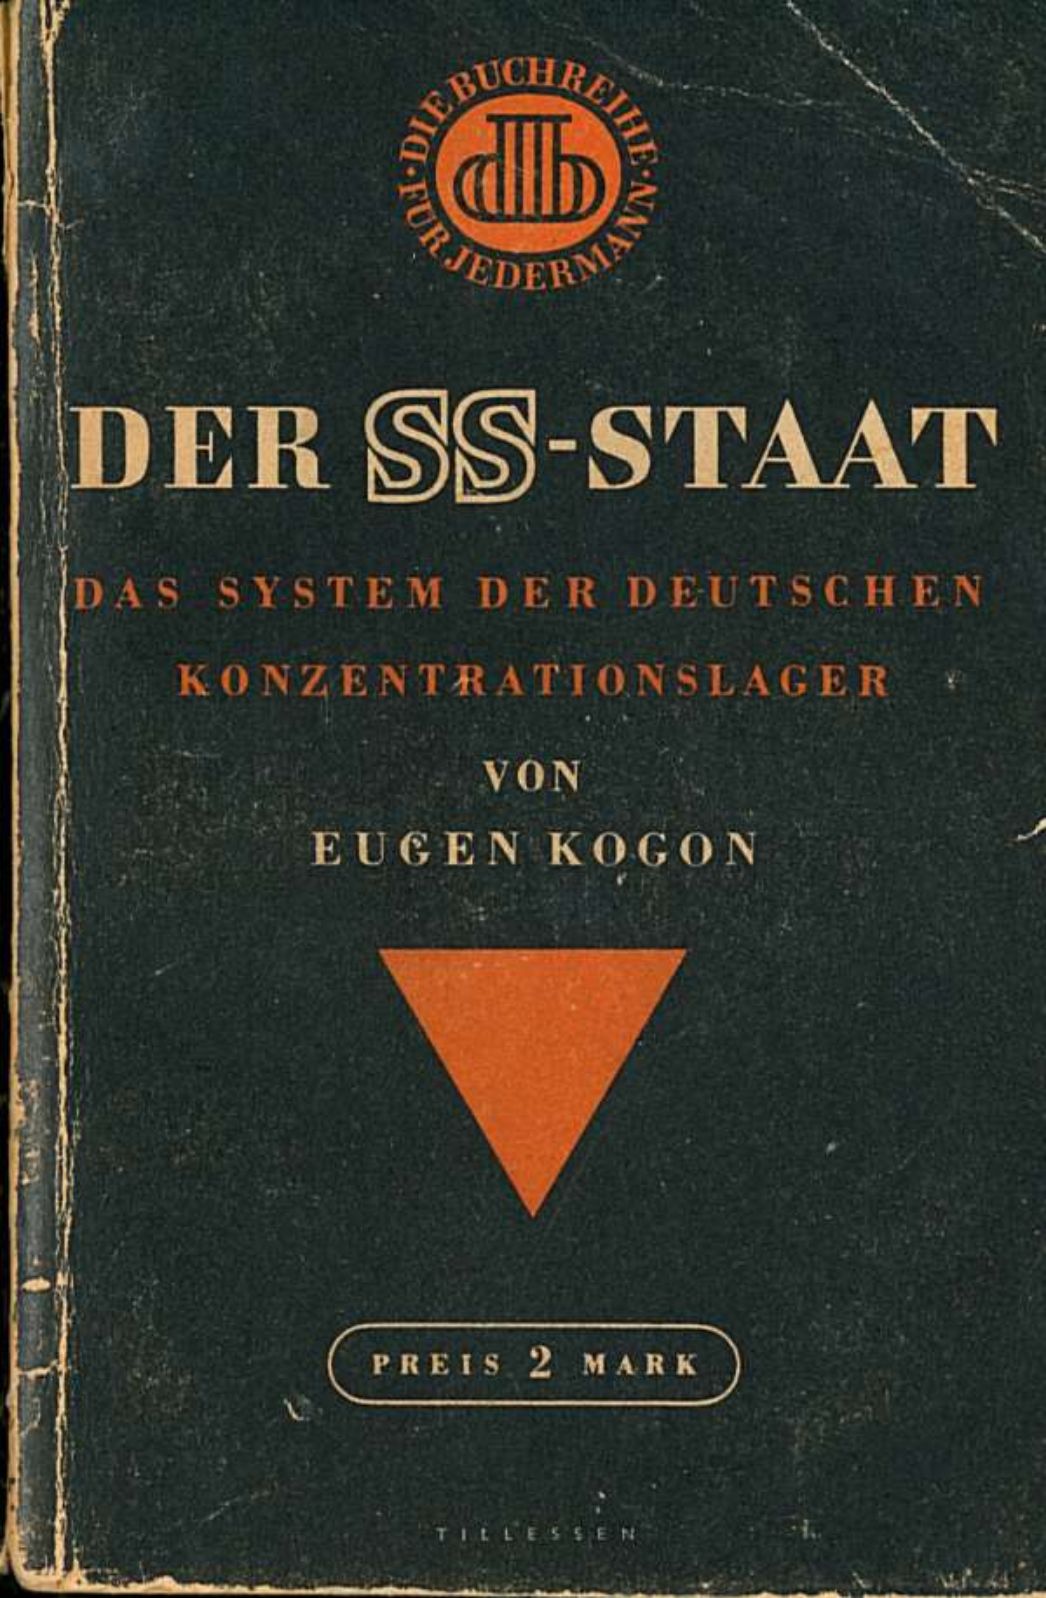 Book cover of Eugen Krogon's "The SS State - The System of German Concentration Camps" The cover is black. At the top is the orange seal "The book series for everyone". An orange isosceles triangle is placed under the title. Underneath is the price of 2 marks.